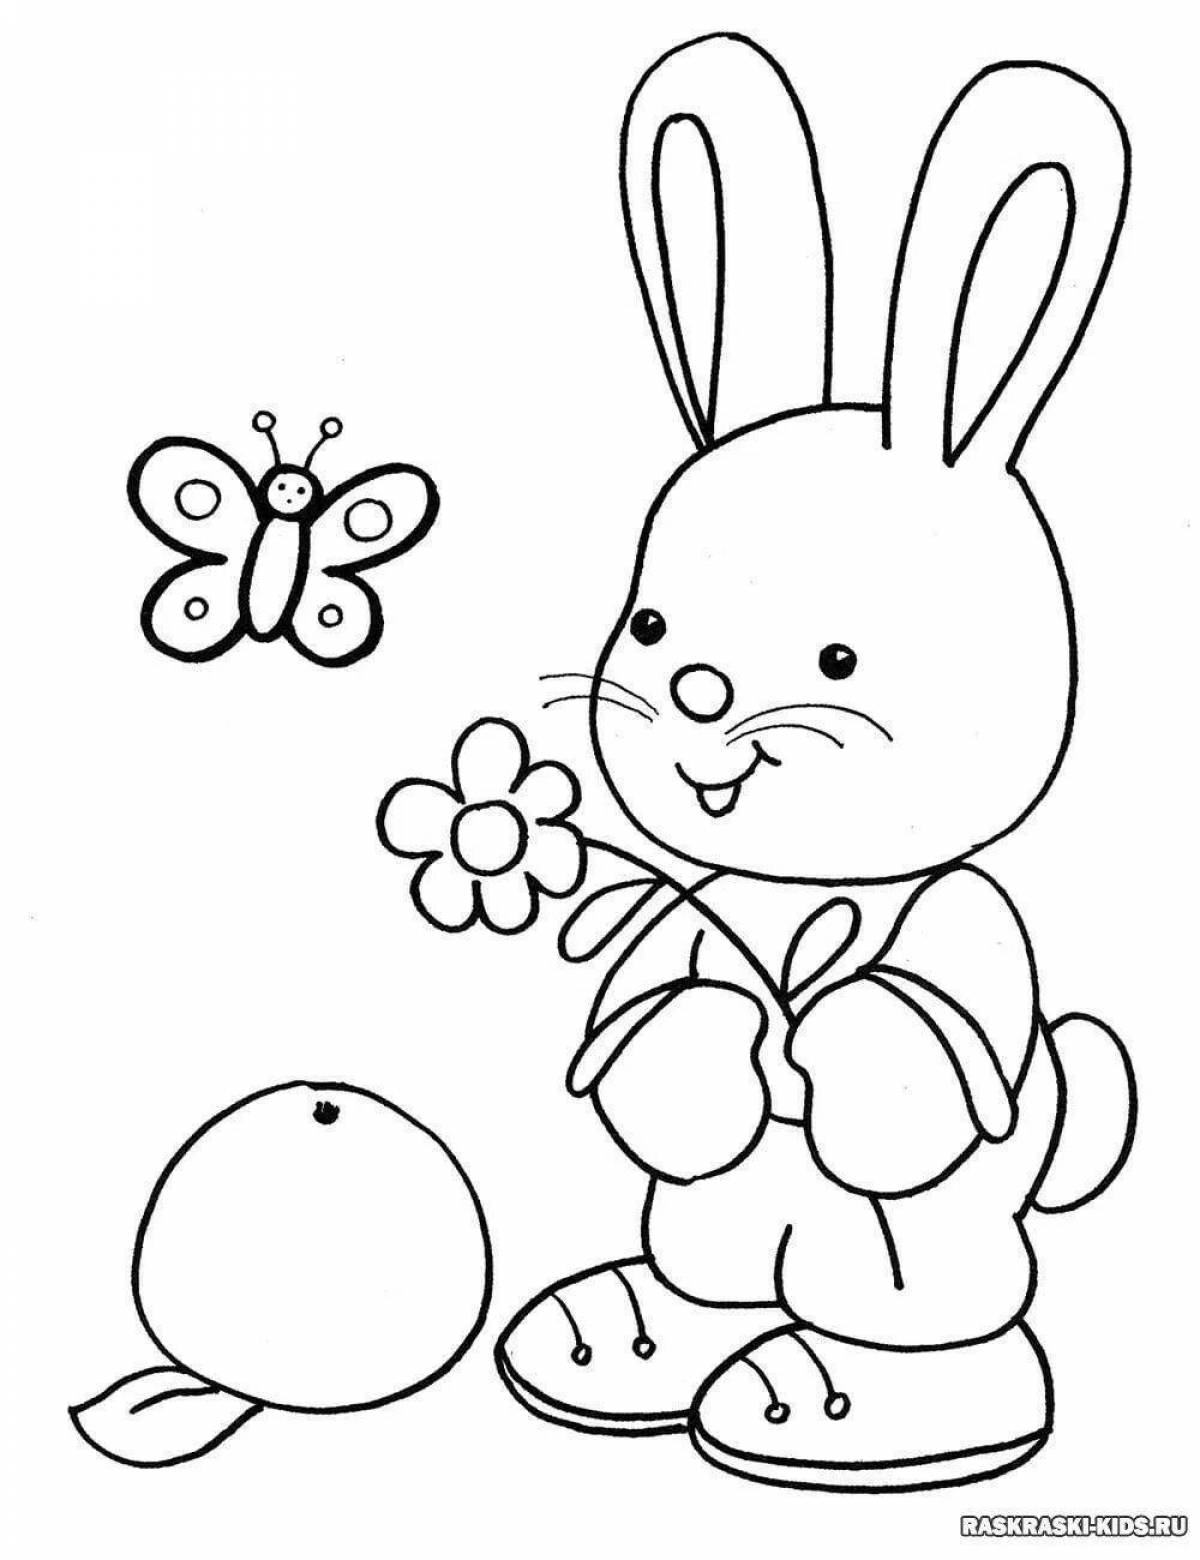 Cute coloring book for girls 4 years old